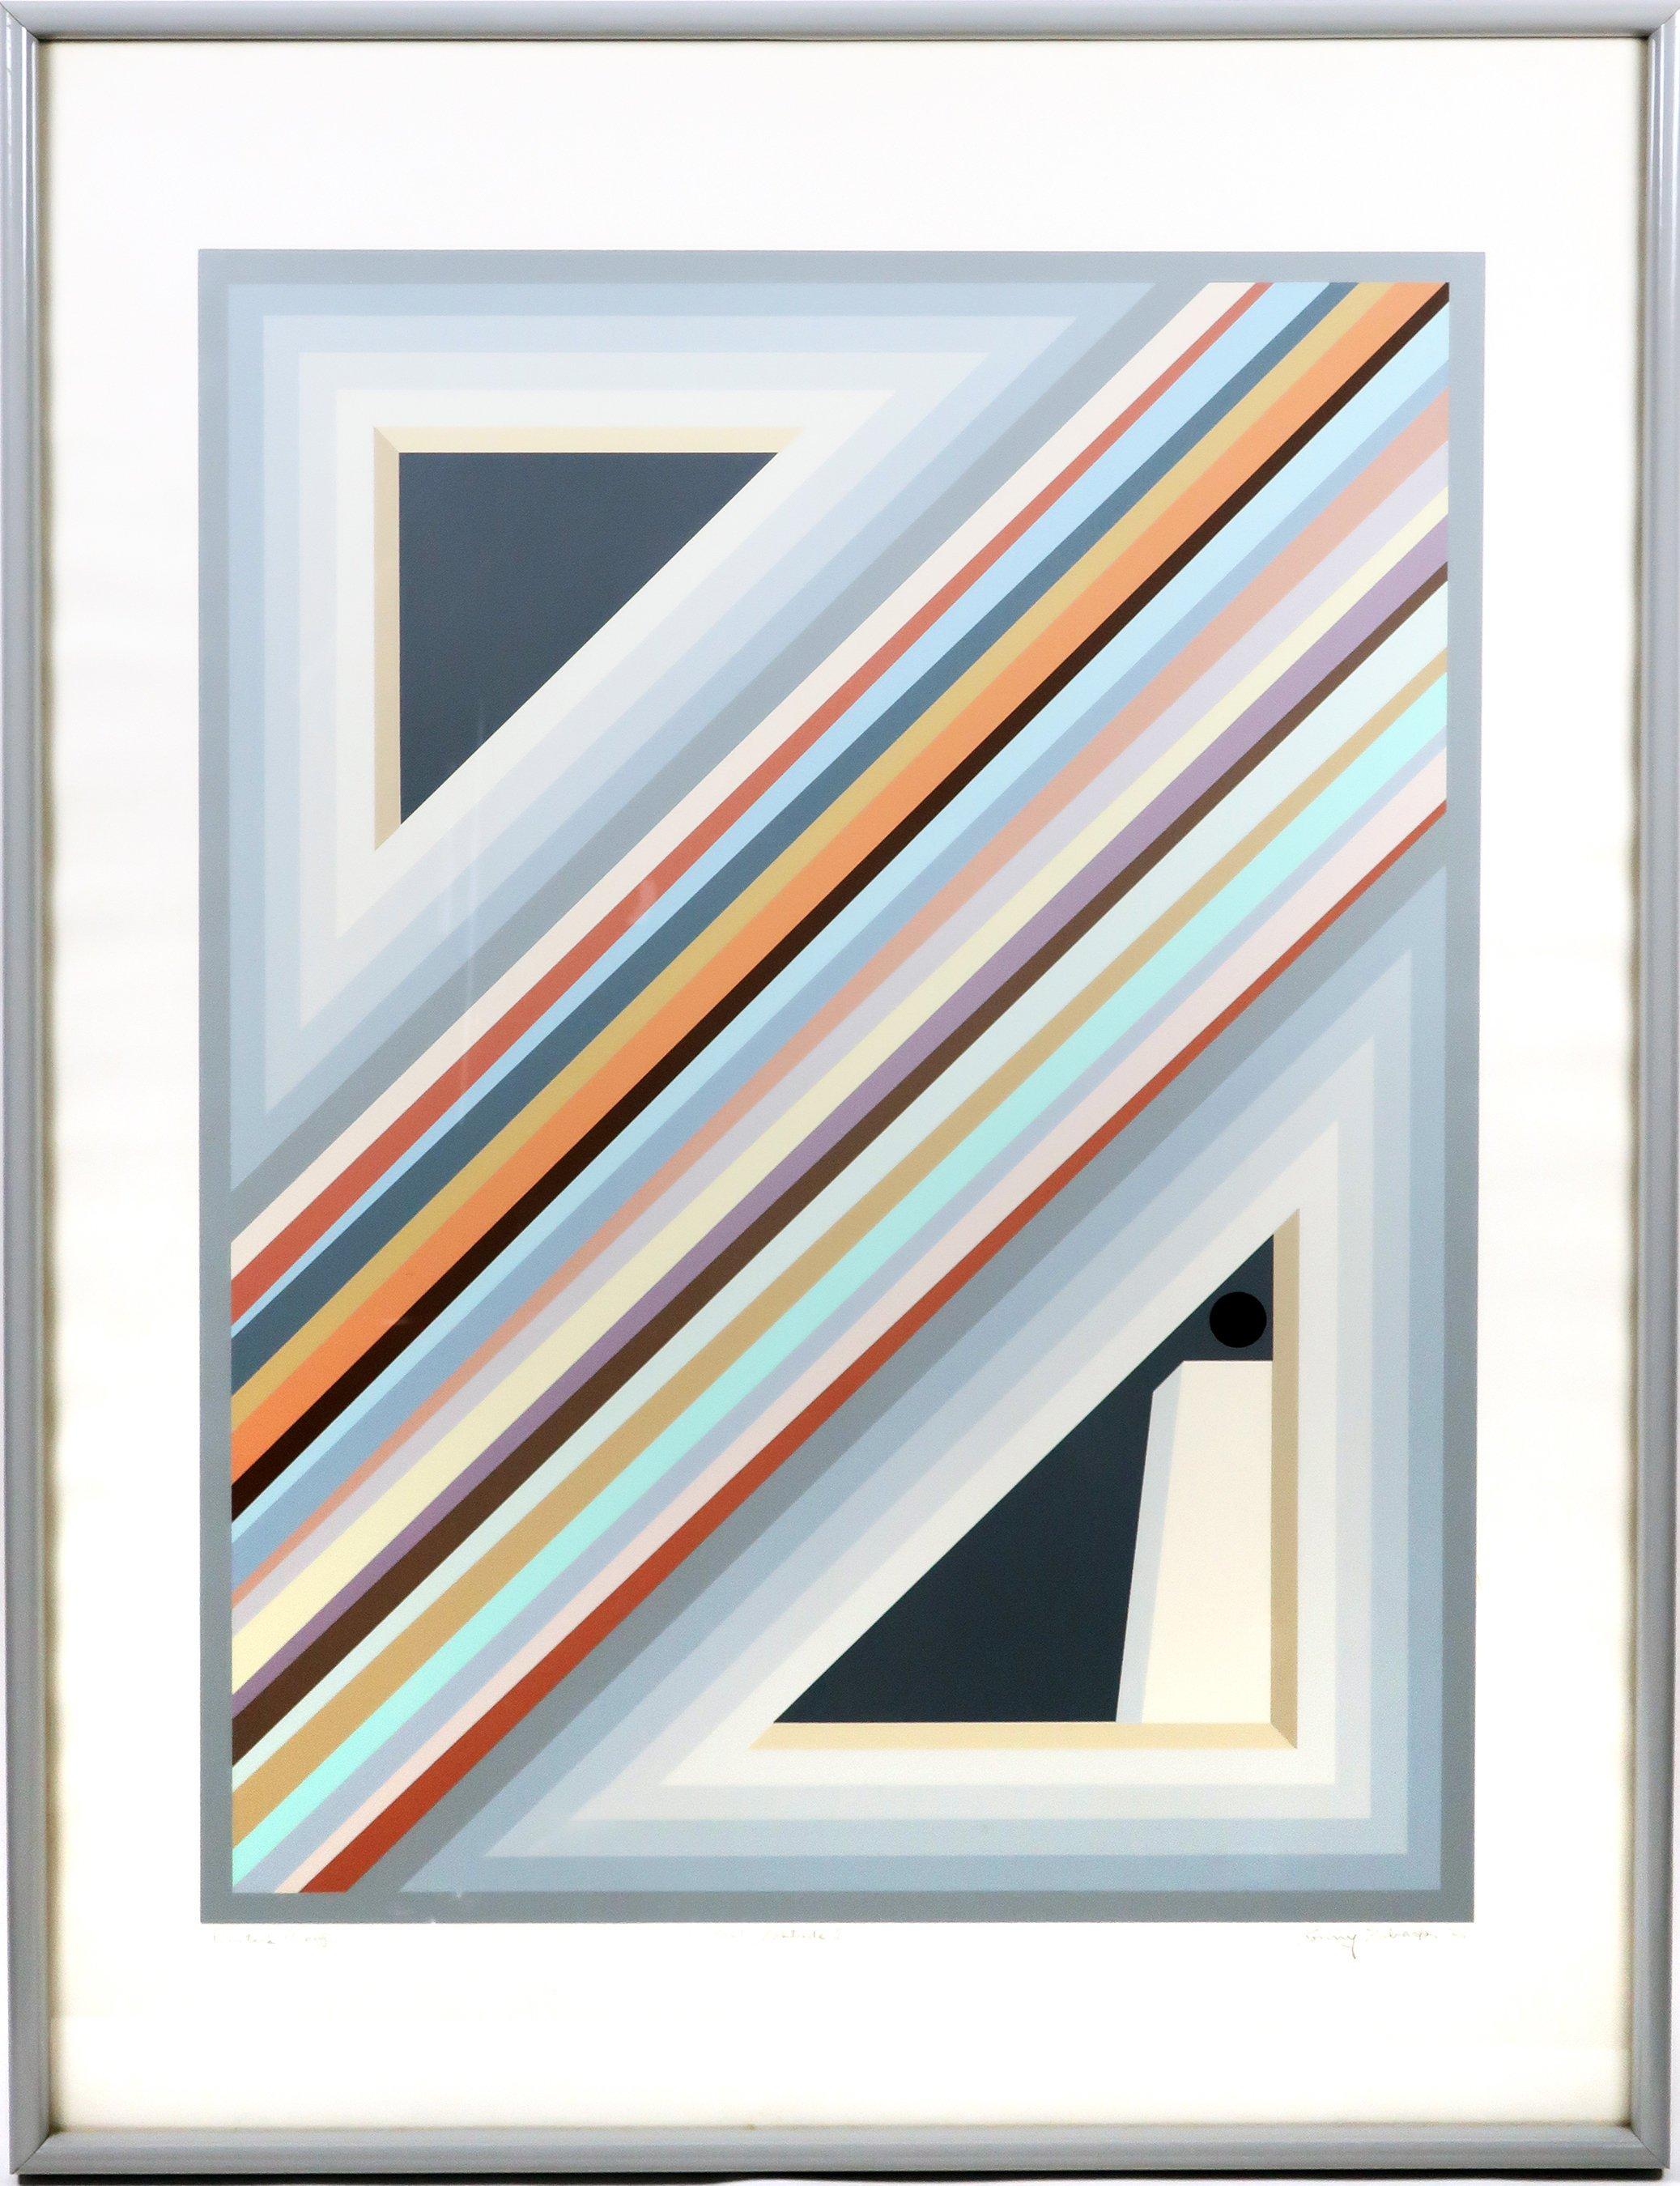 A captivating op-art serigraph by Sonny Zoback dated 1984. Hand signed, titled, and dated by the artist, this print of “Solitude II” is noted as a Printer’s Proof. 

Presented in a grey metal frame and ready to hang. In excellent vintage